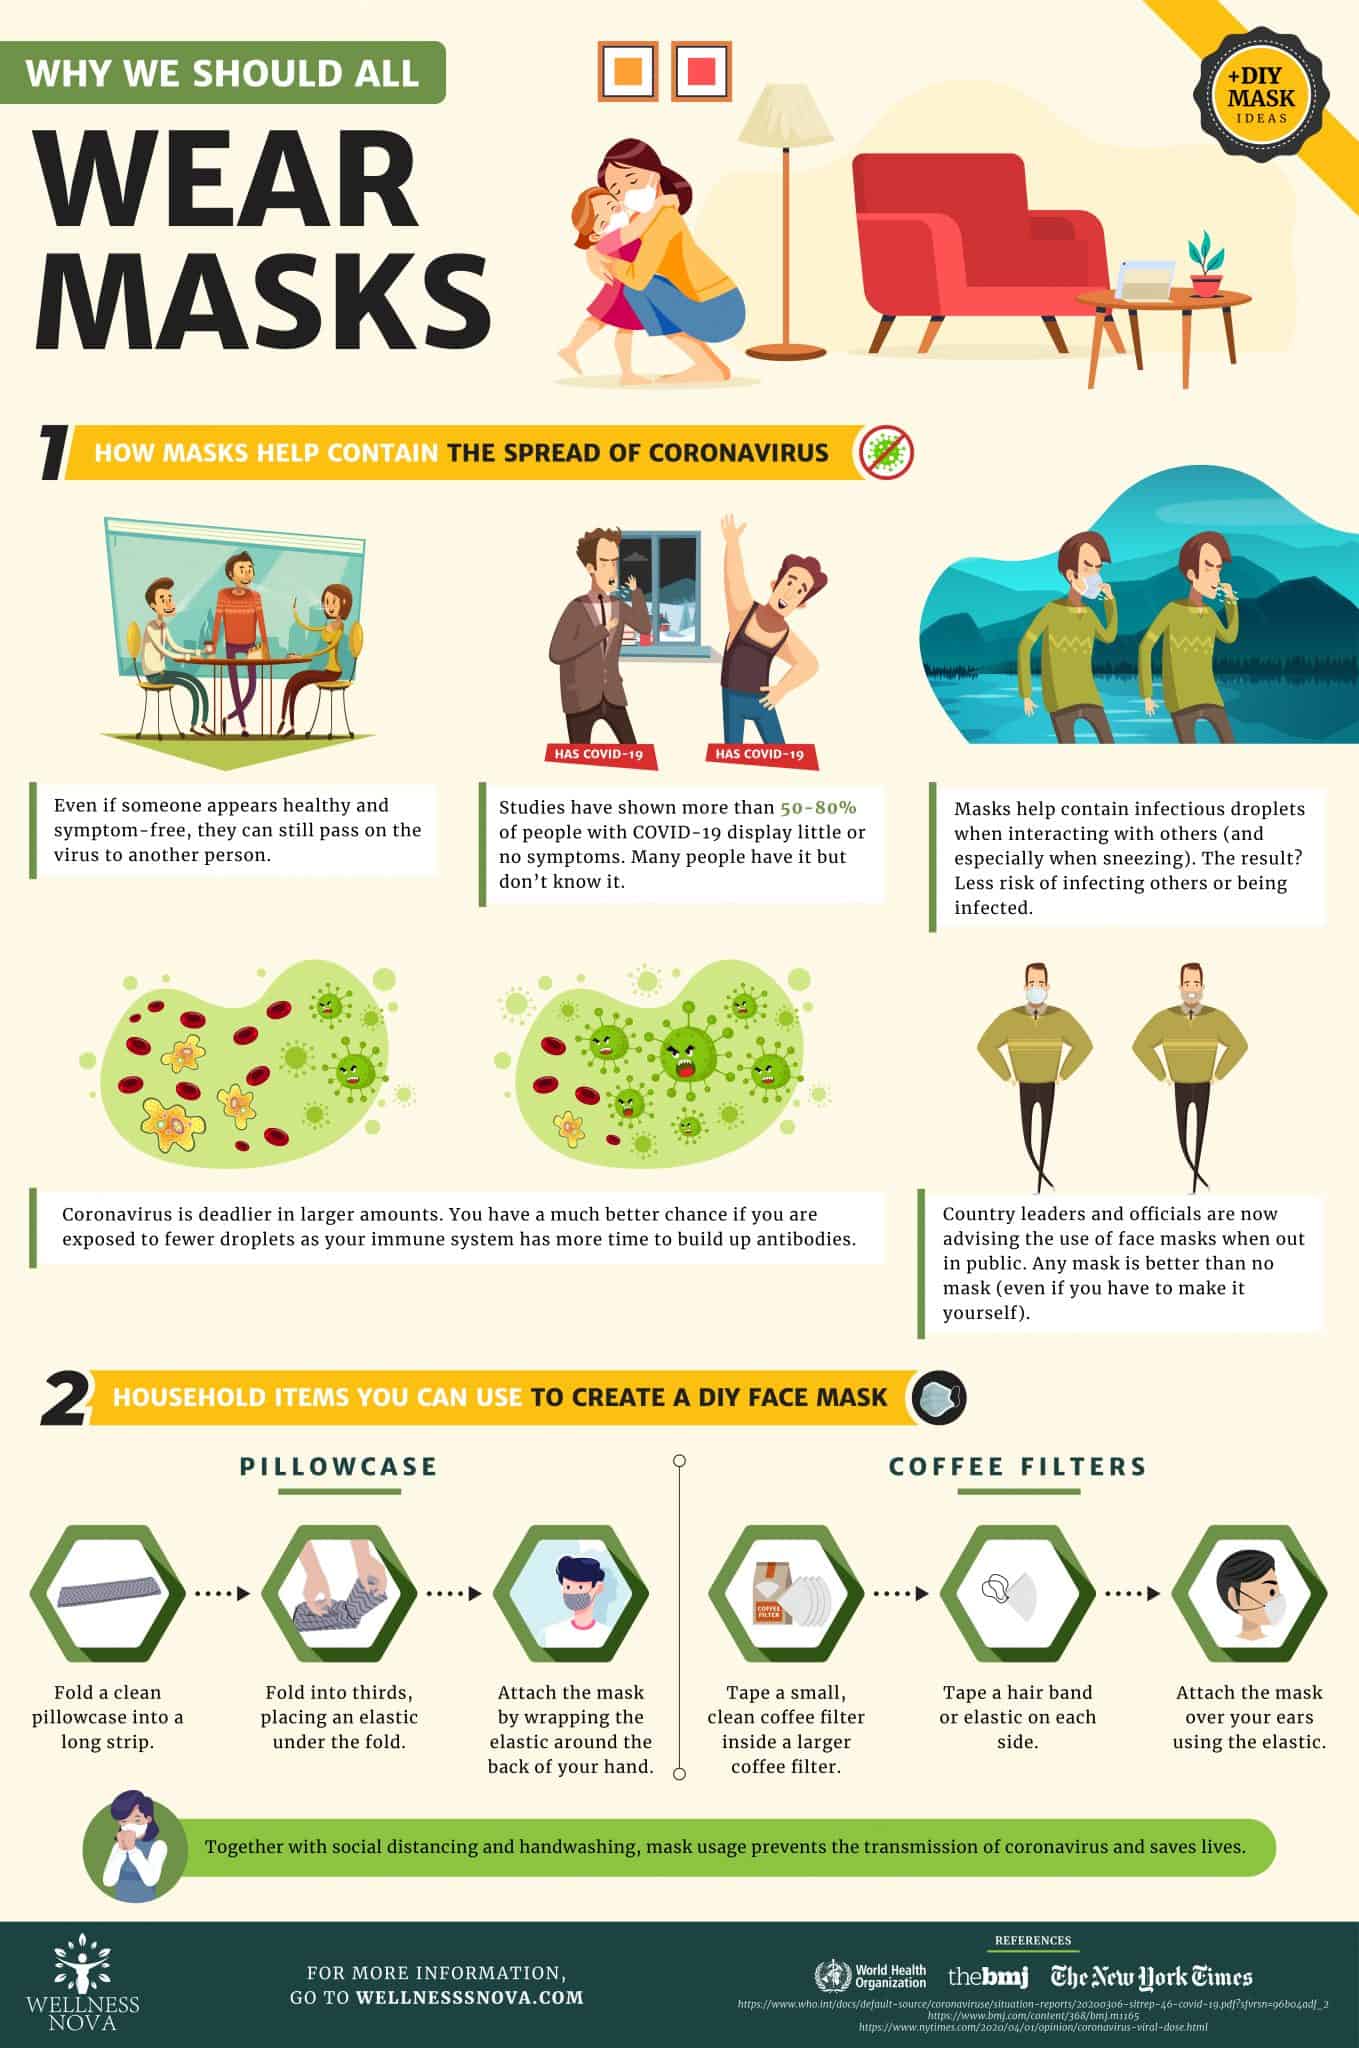 Why-we-should-all-wear-masks-infographic-plaza